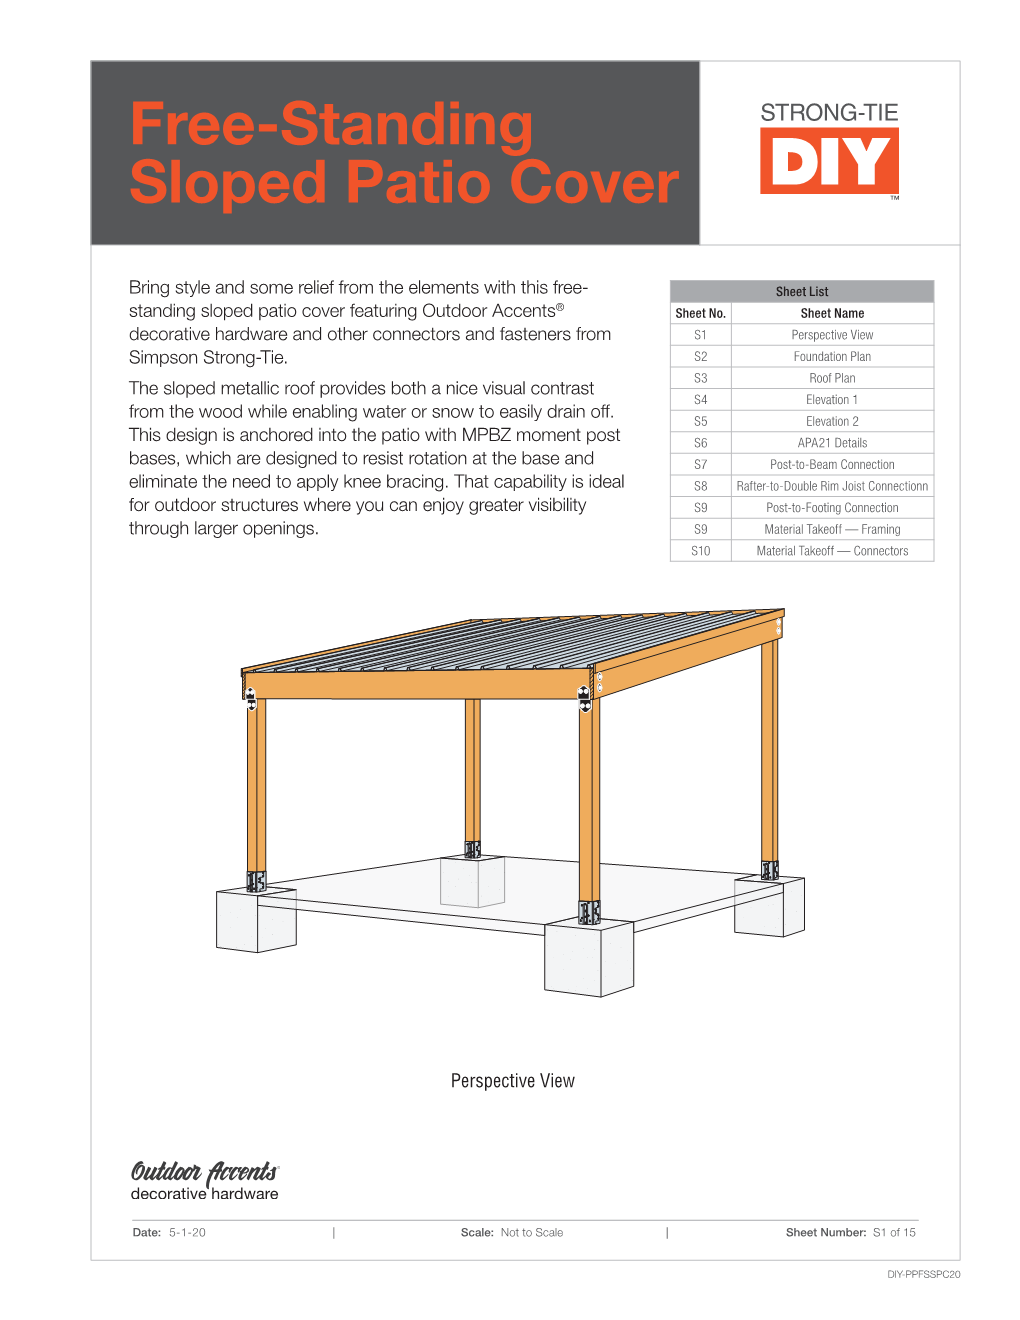 Free-Standing Sloped Patio Cover Project Plans